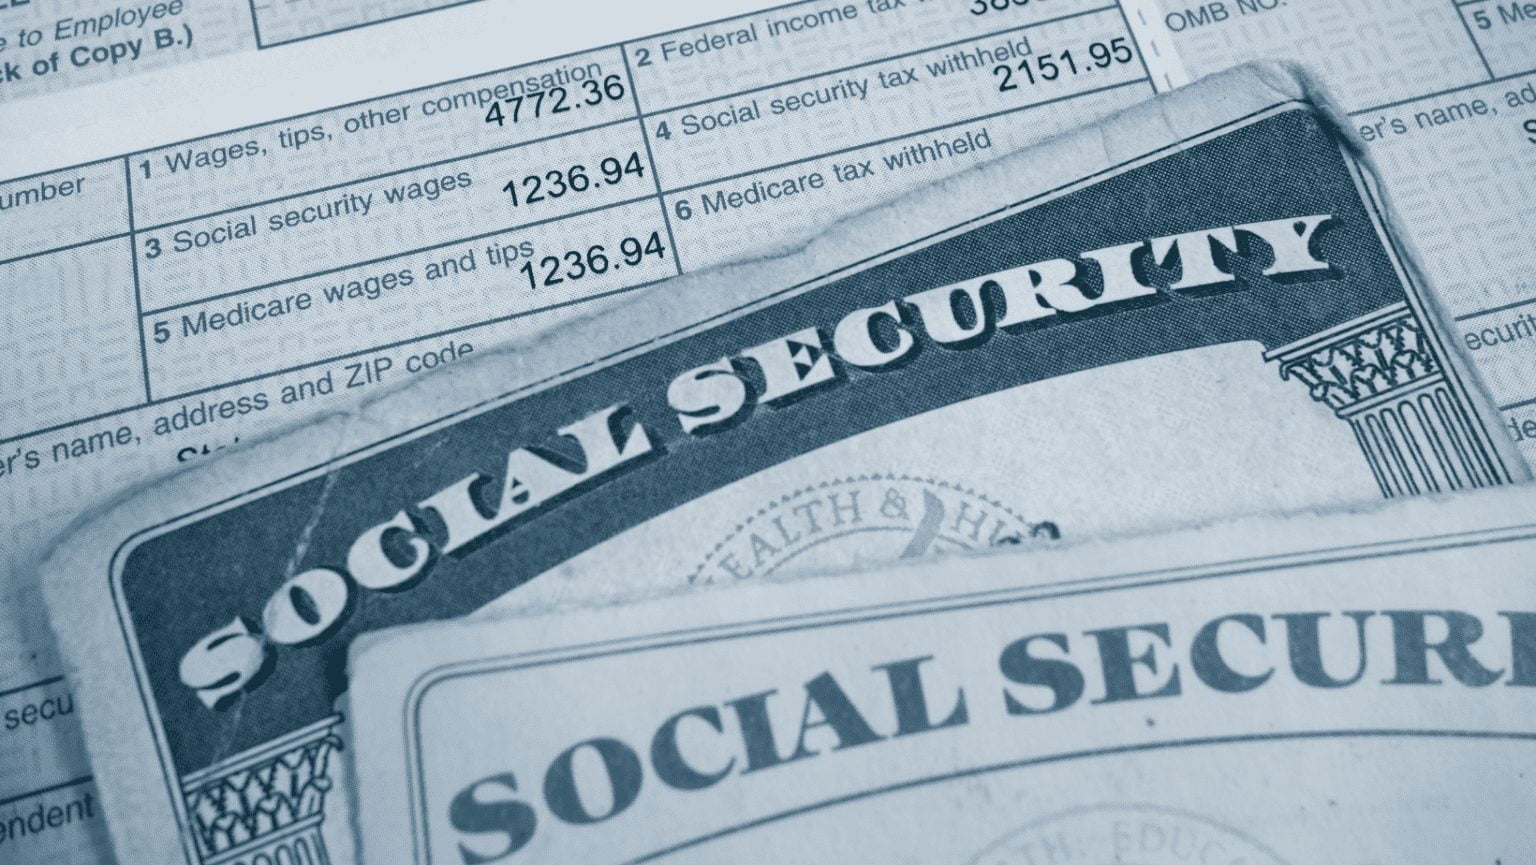 Social Security what is the rule for people over 66 to take into